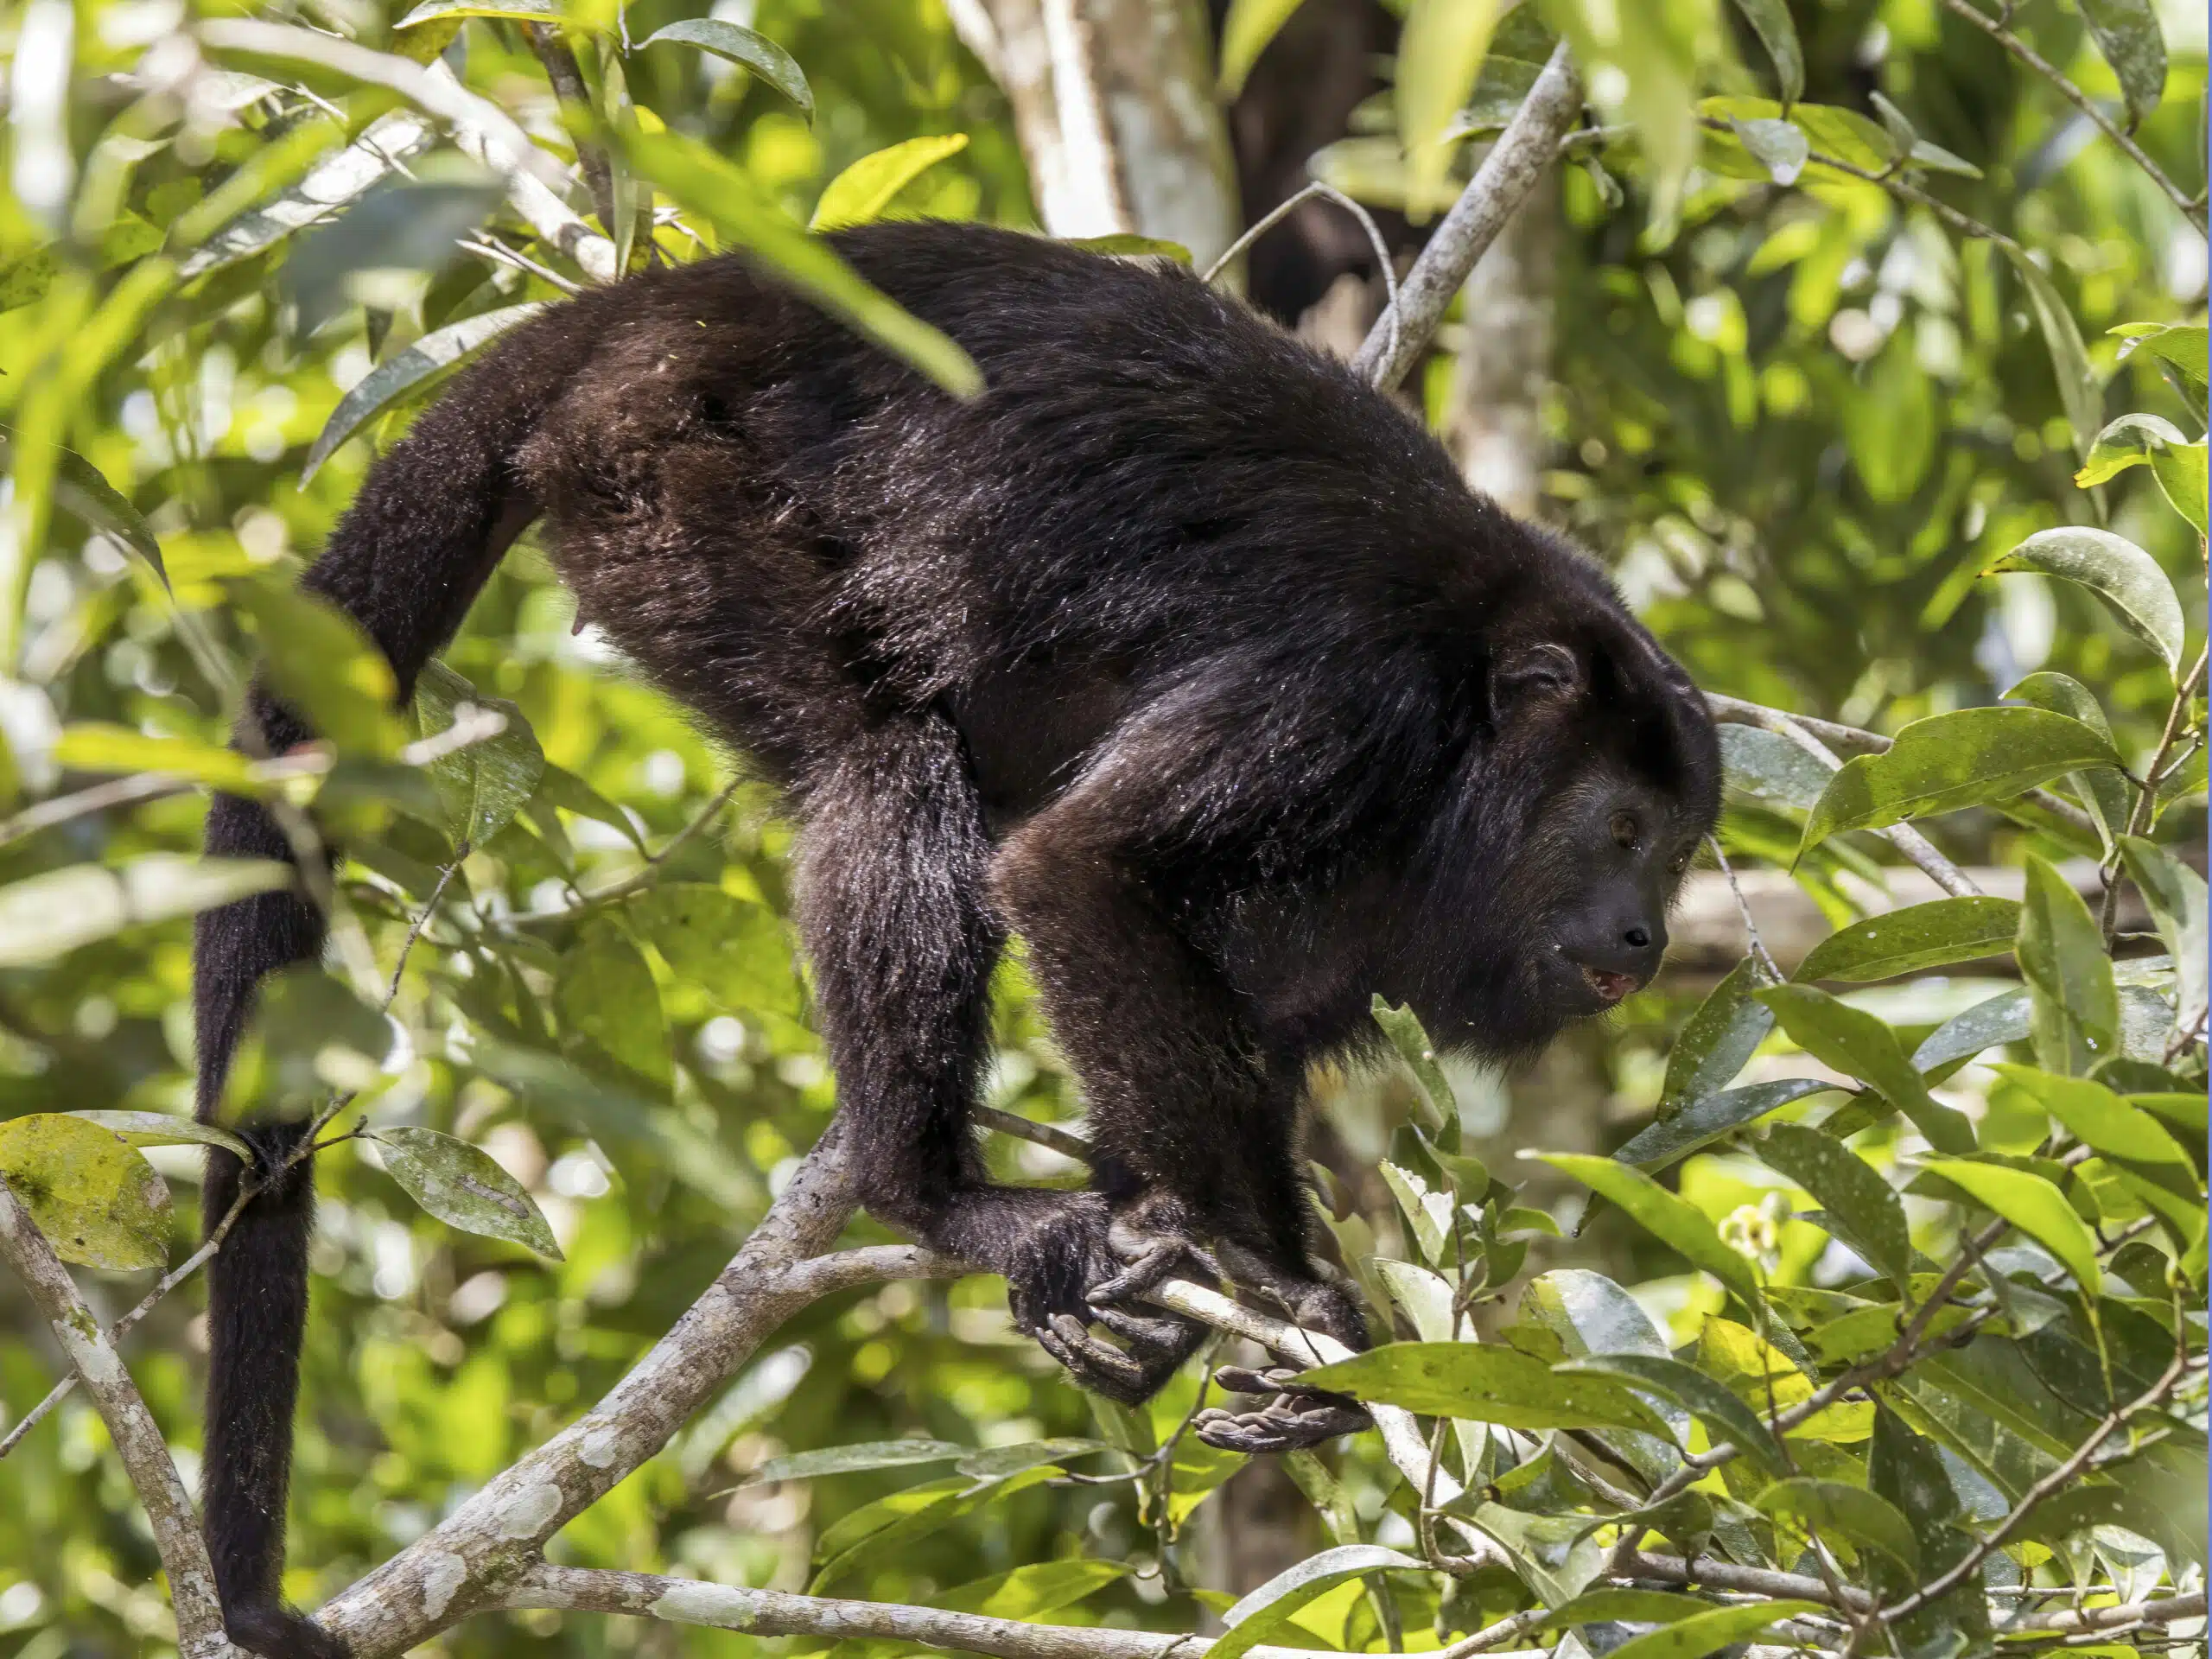 A Yucatan Howler Monkey is one of the Monkeys in Mexico